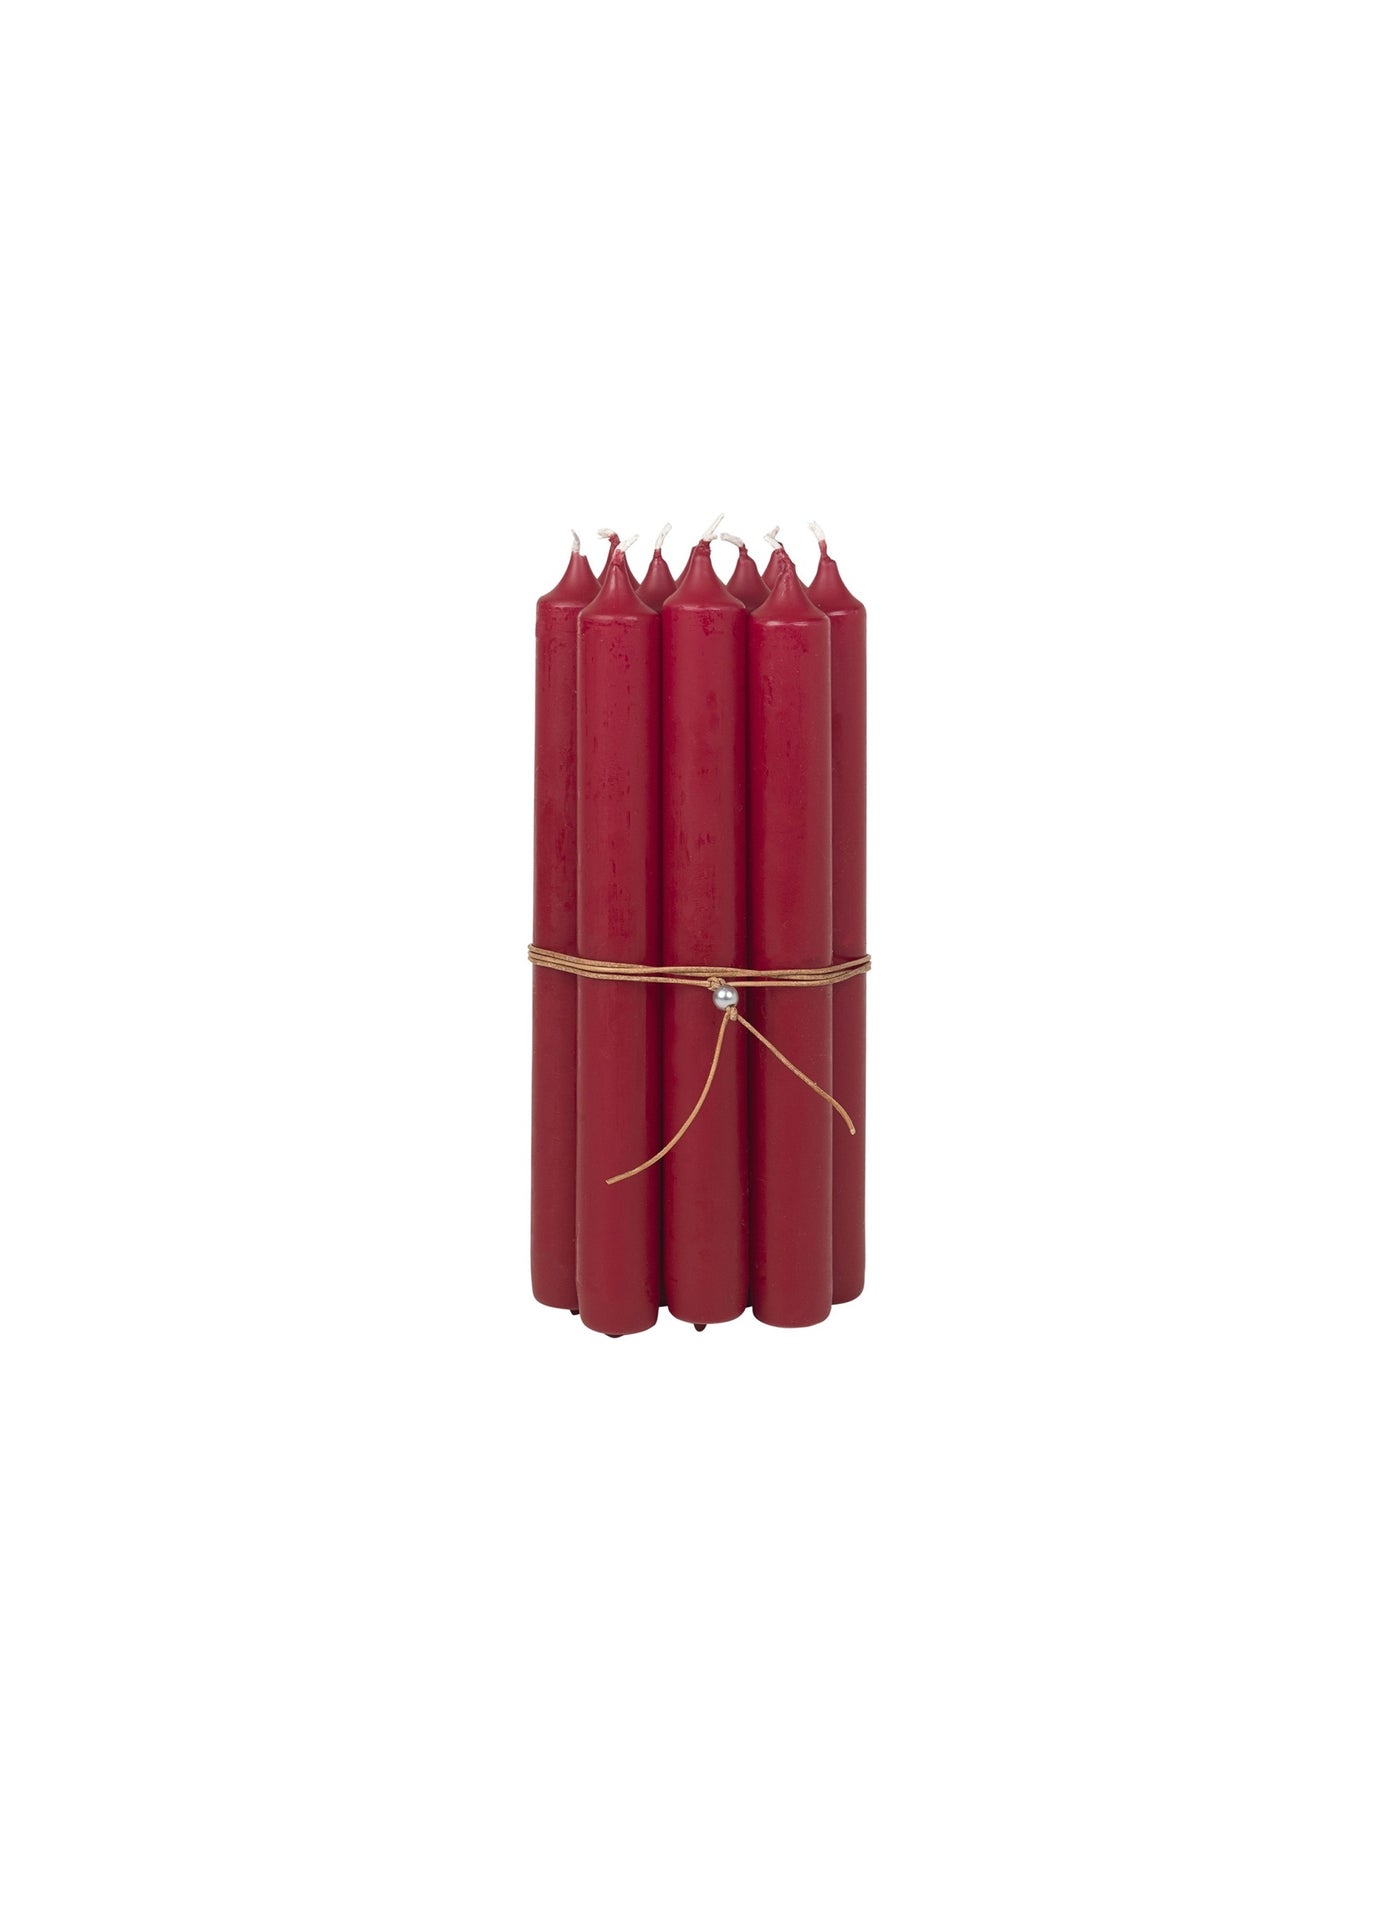 Broste Copenhagen Classic Candle Set of 10 - Truly Red